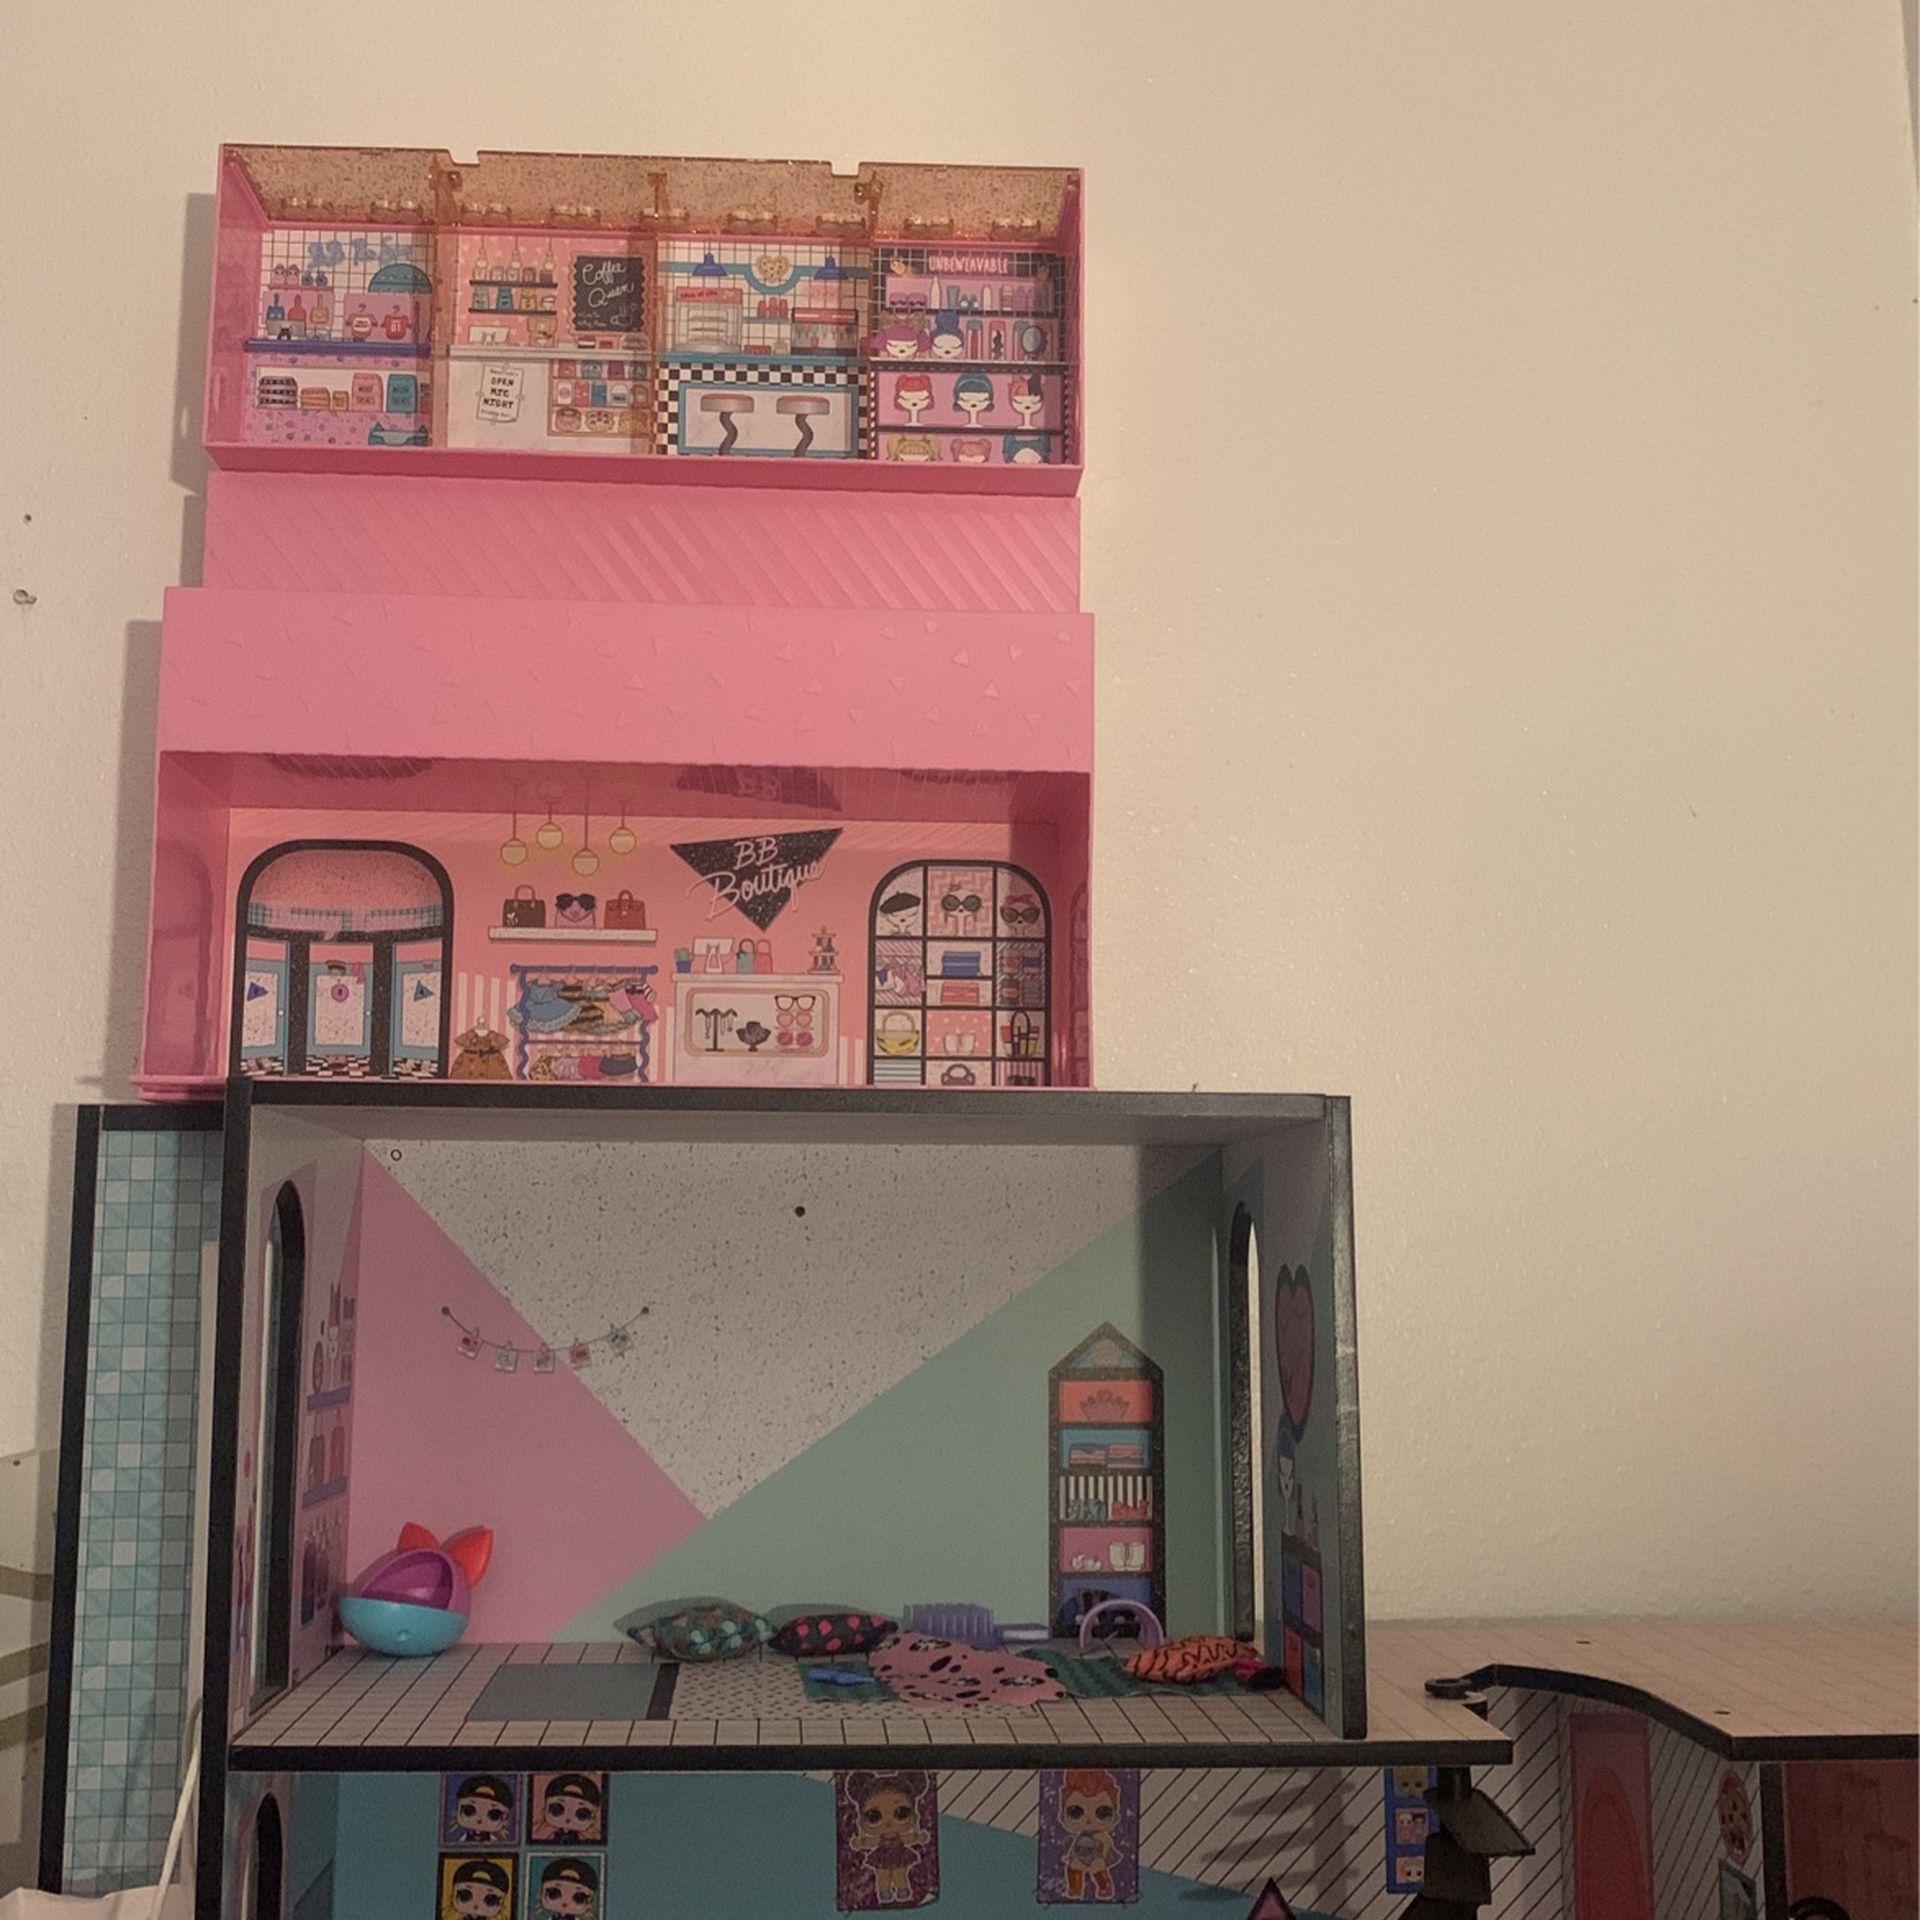 LOL DOLL HOUSE AND DISPLAY SET ADDED